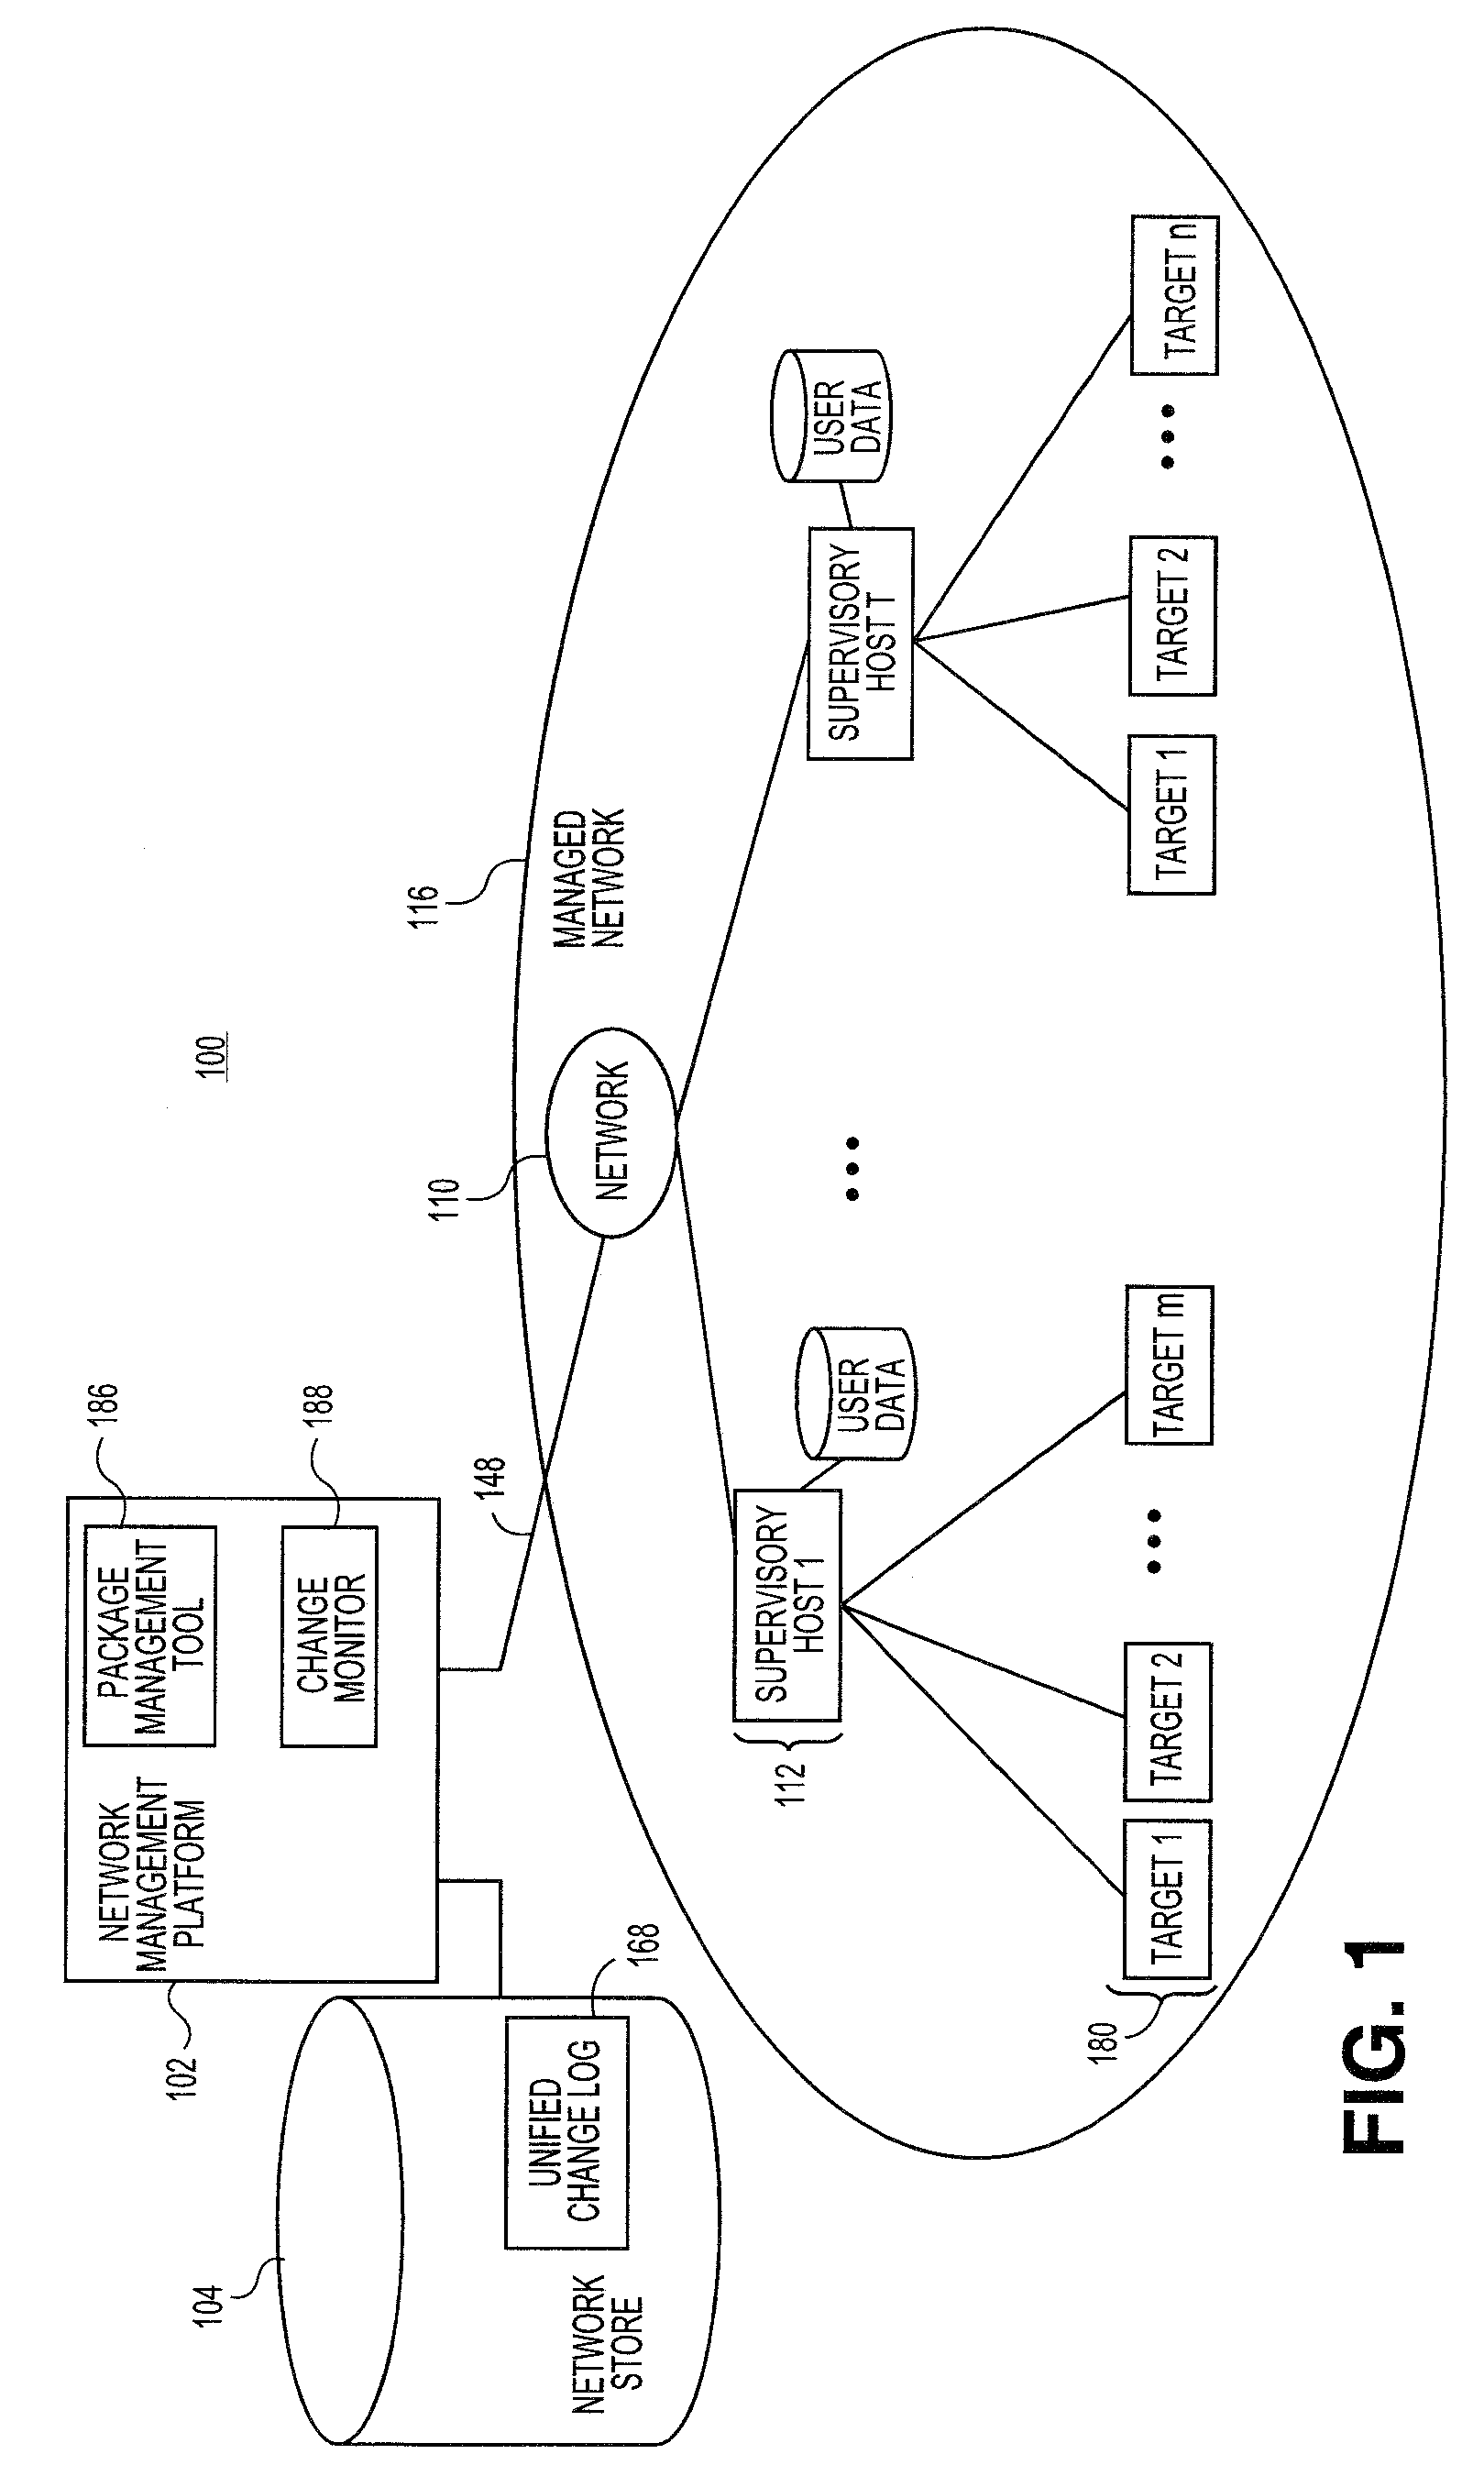 Systems and methods for generating a change log for files in a managed network